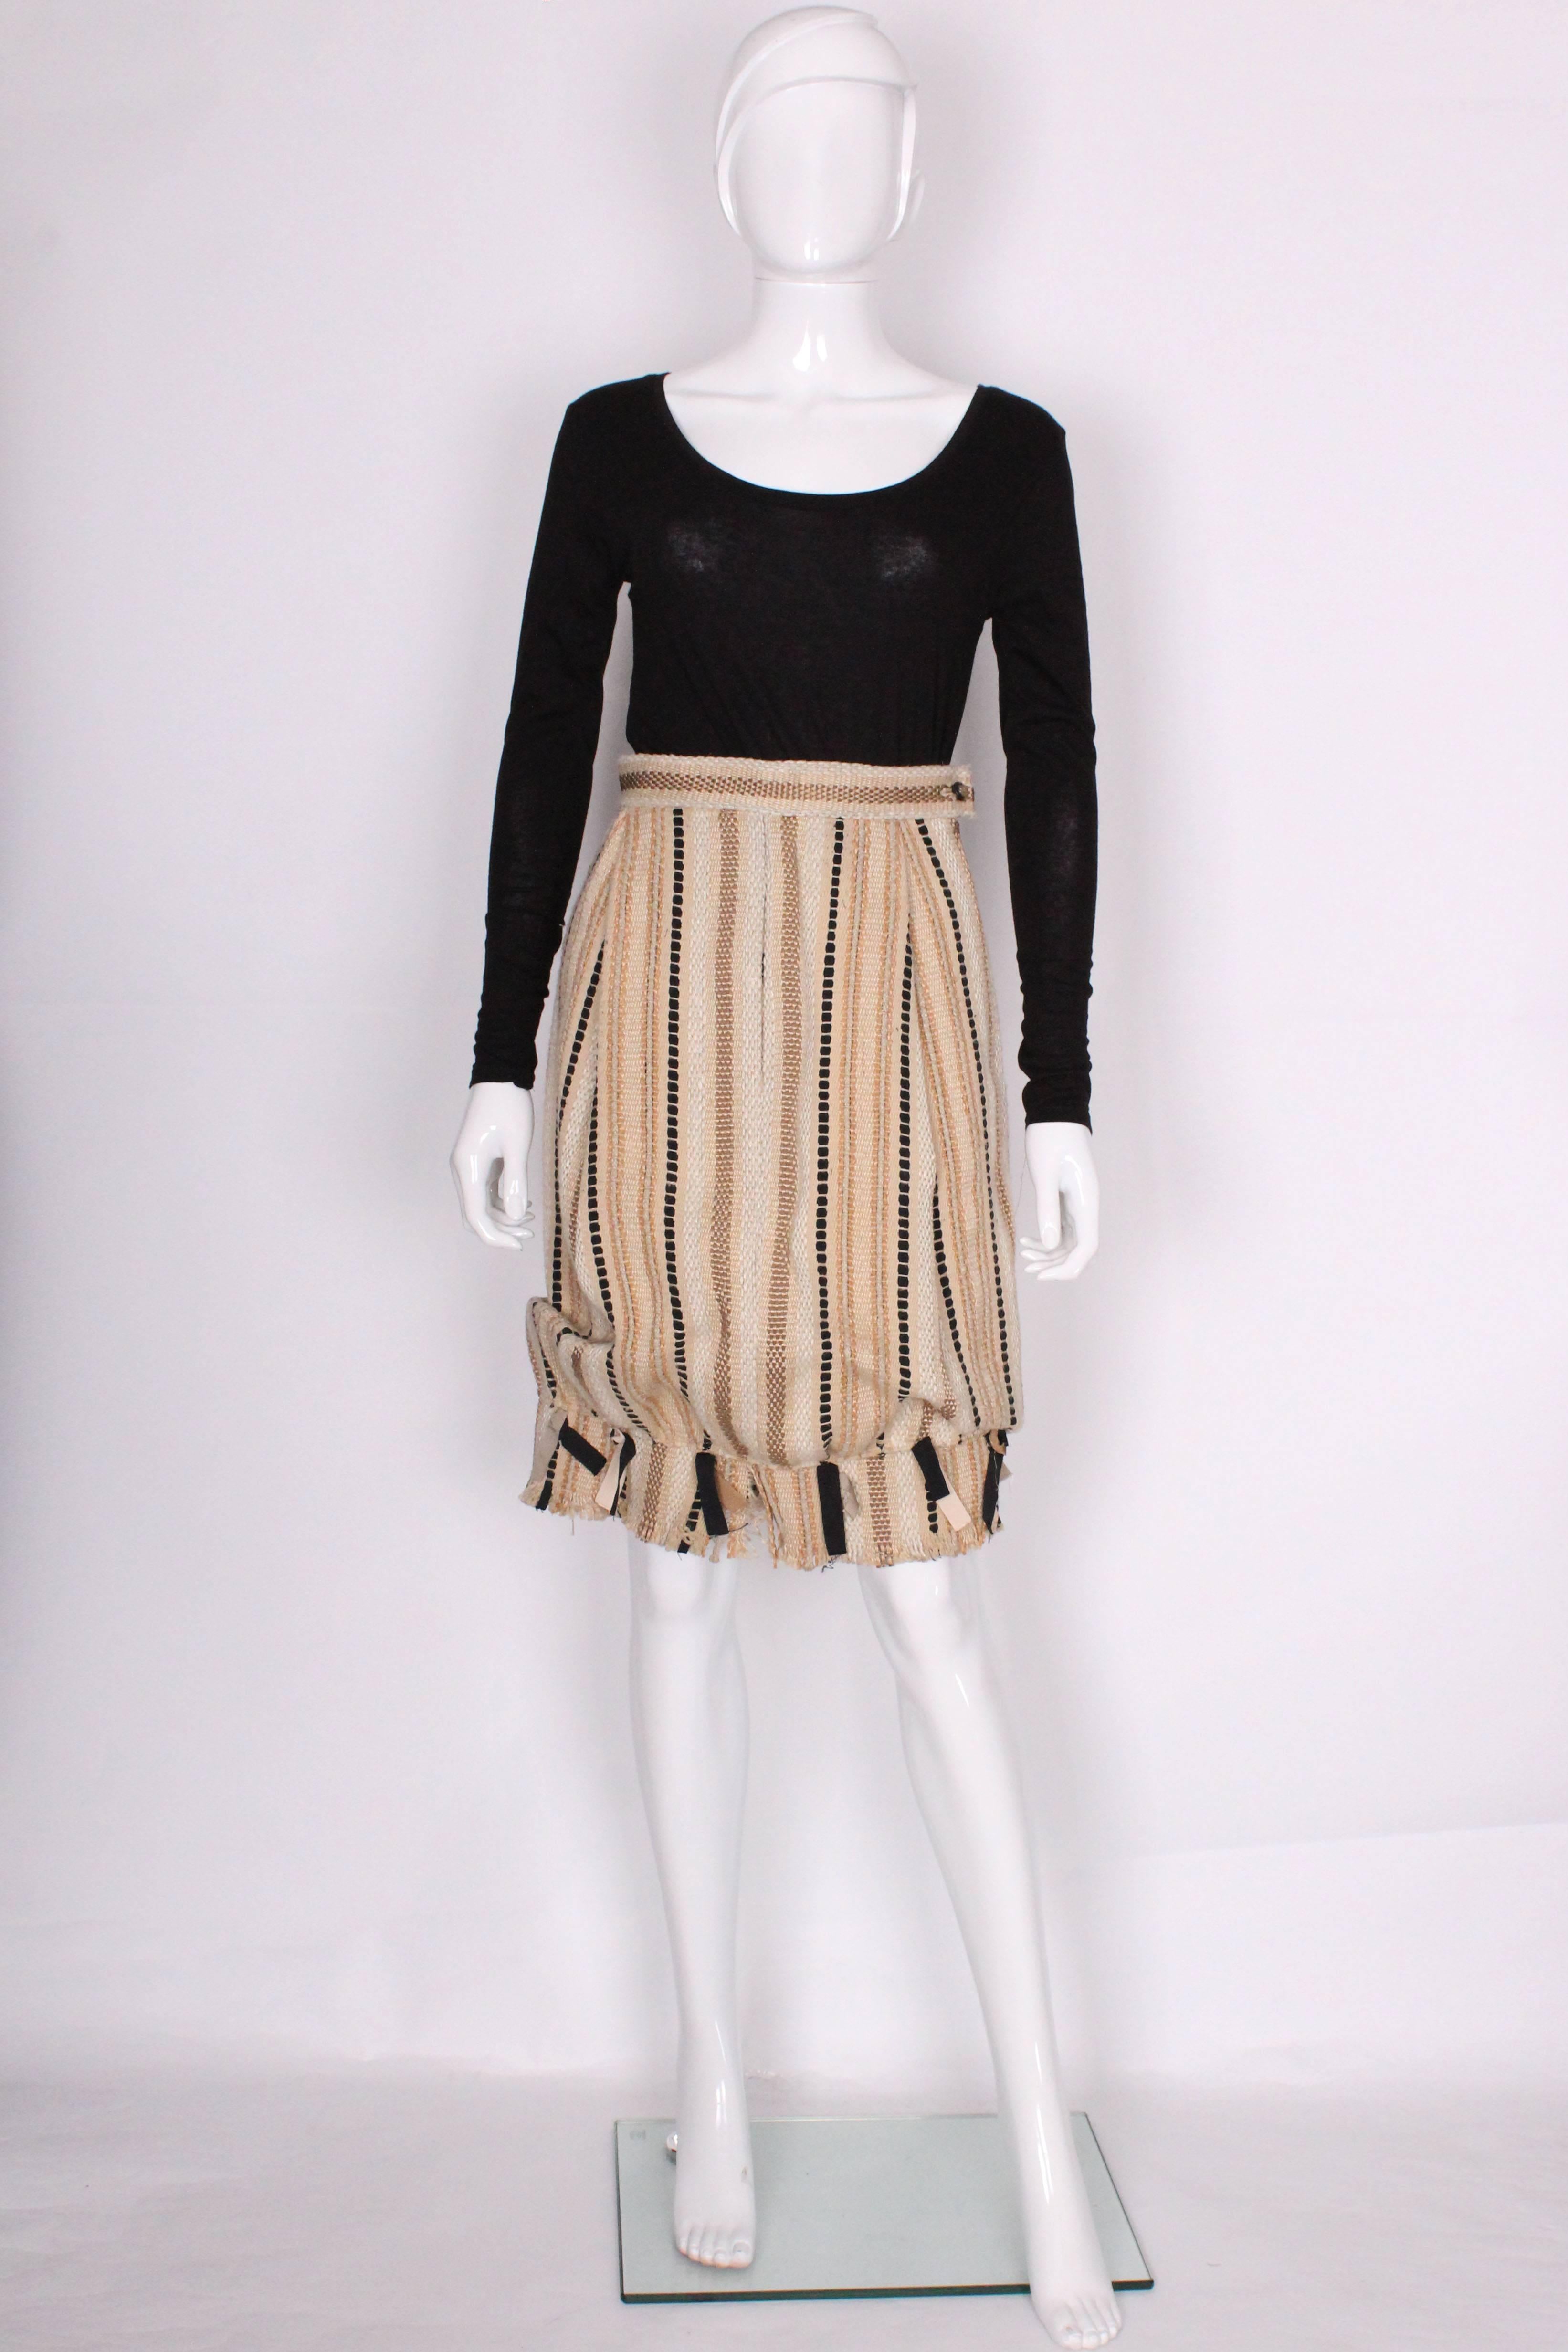 A great skirt by Yves Saint Laurent, Rive Gauche.This skirt is a bubble shape with a 3 1/2'' frill with ribbon detail at the hem. The fabric is a woven mix of linen, jute and acetate, in a biscuit colour background with gold, black and ivory